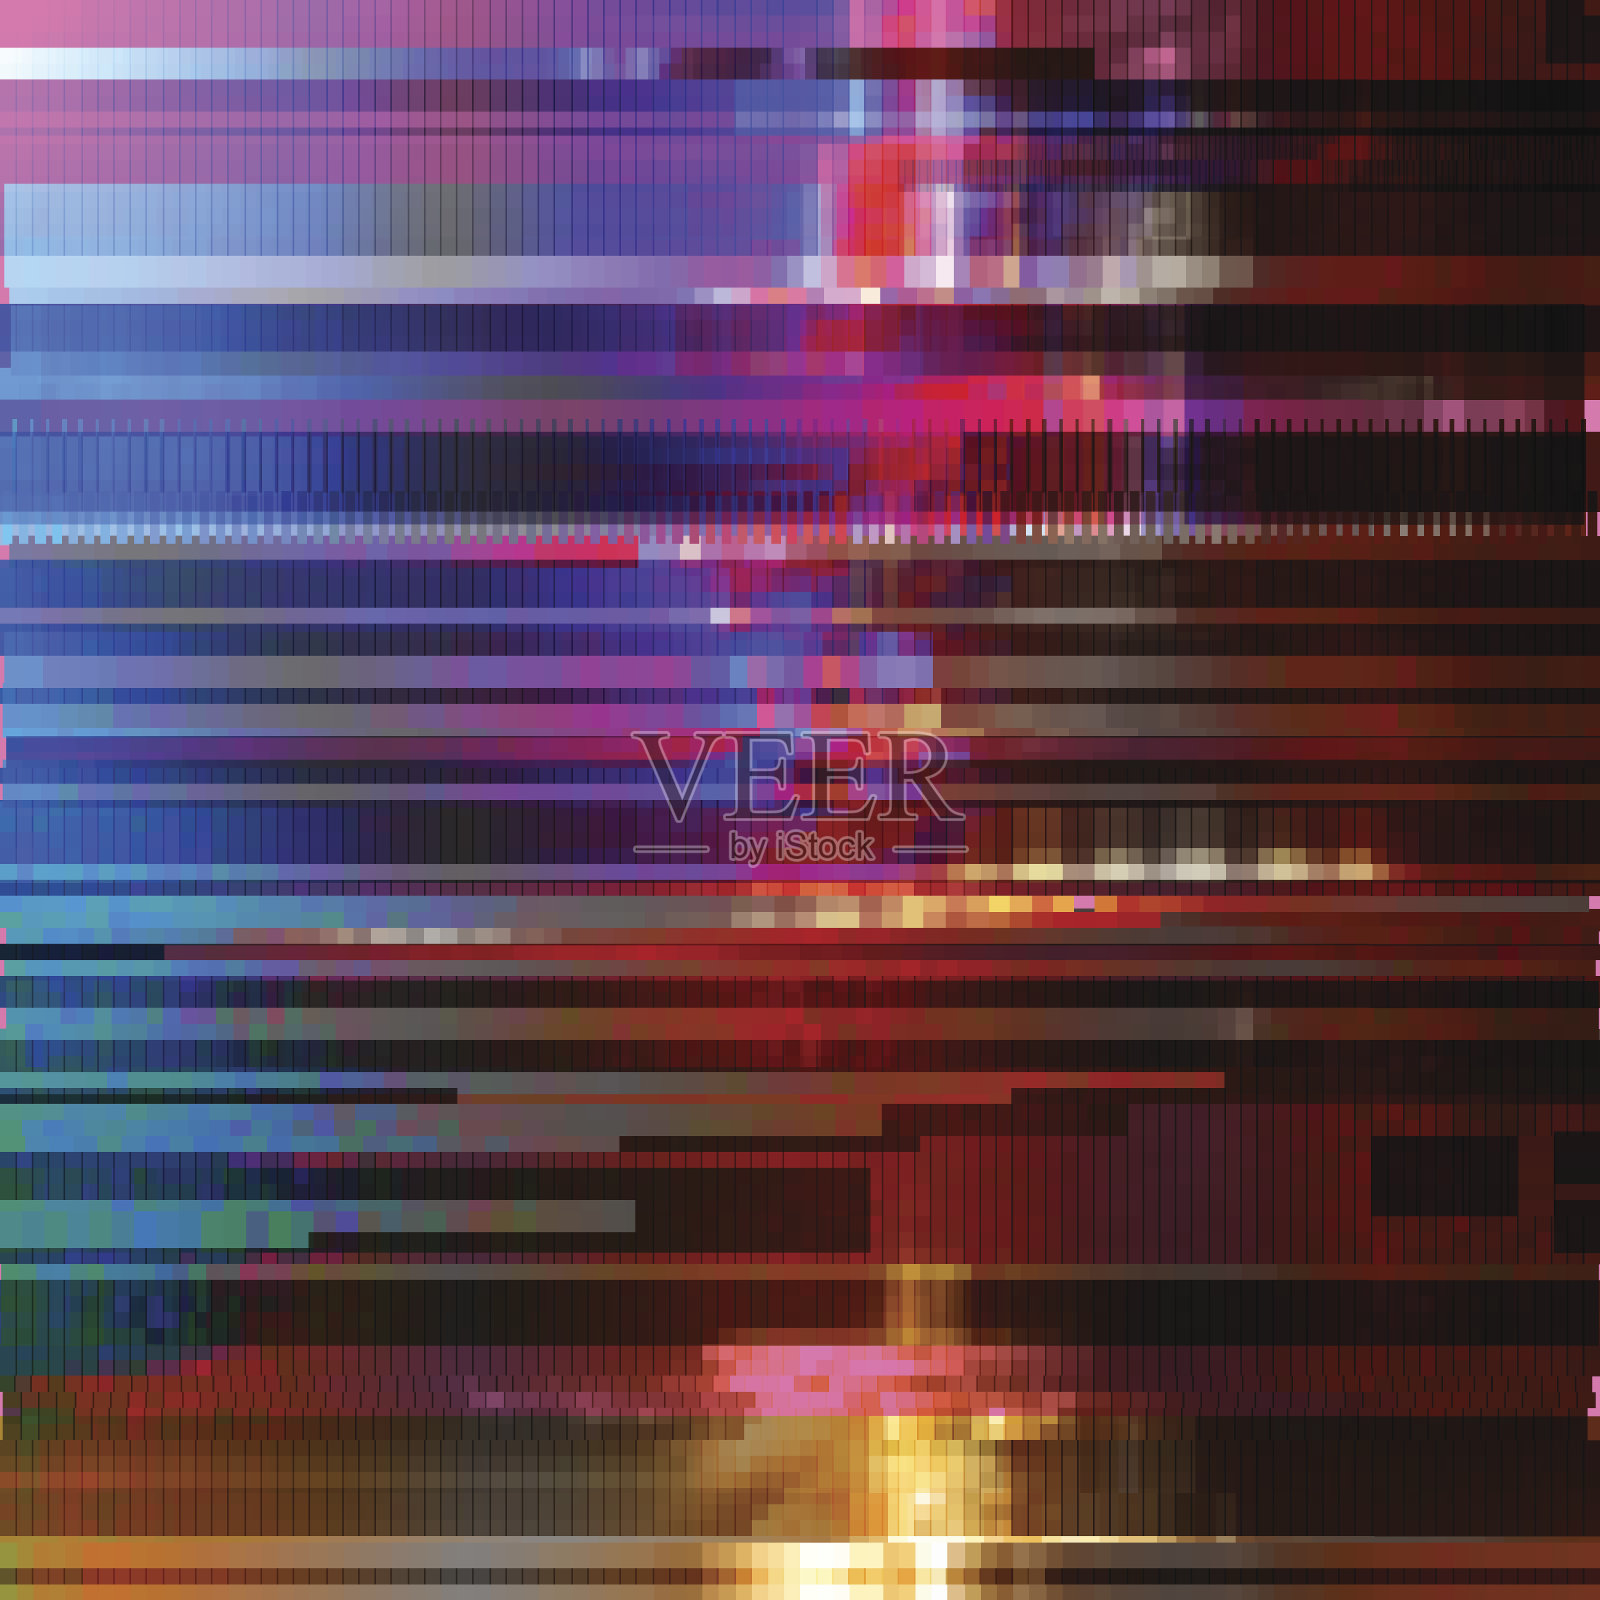 Glitched abstract vector background made of彩色像素马赛克。数字插画图片素材